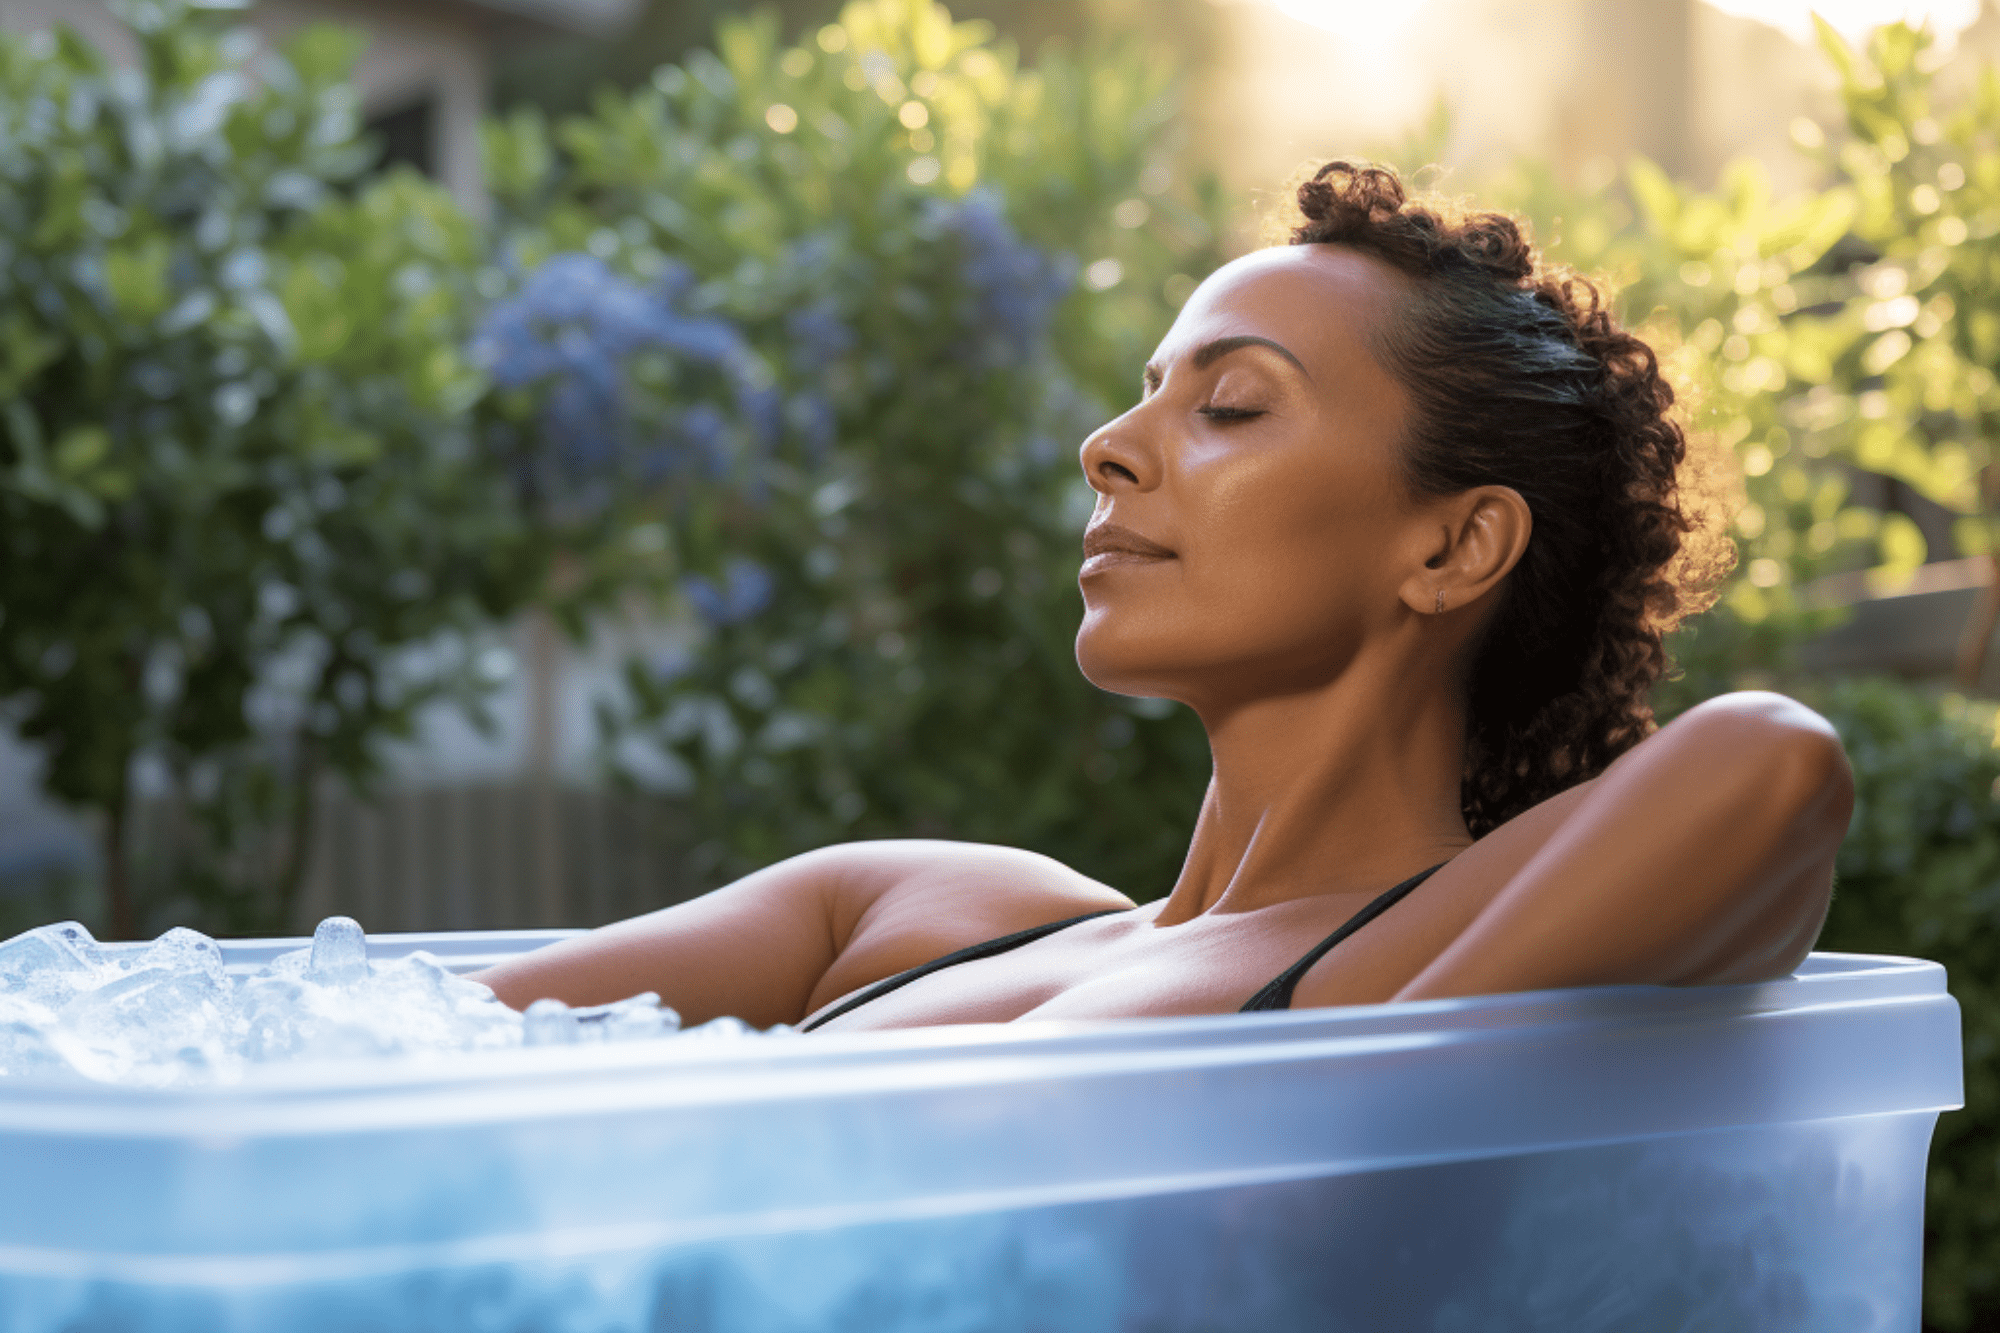 Cold-water plunging health benefits - Mayo Clinic Health System